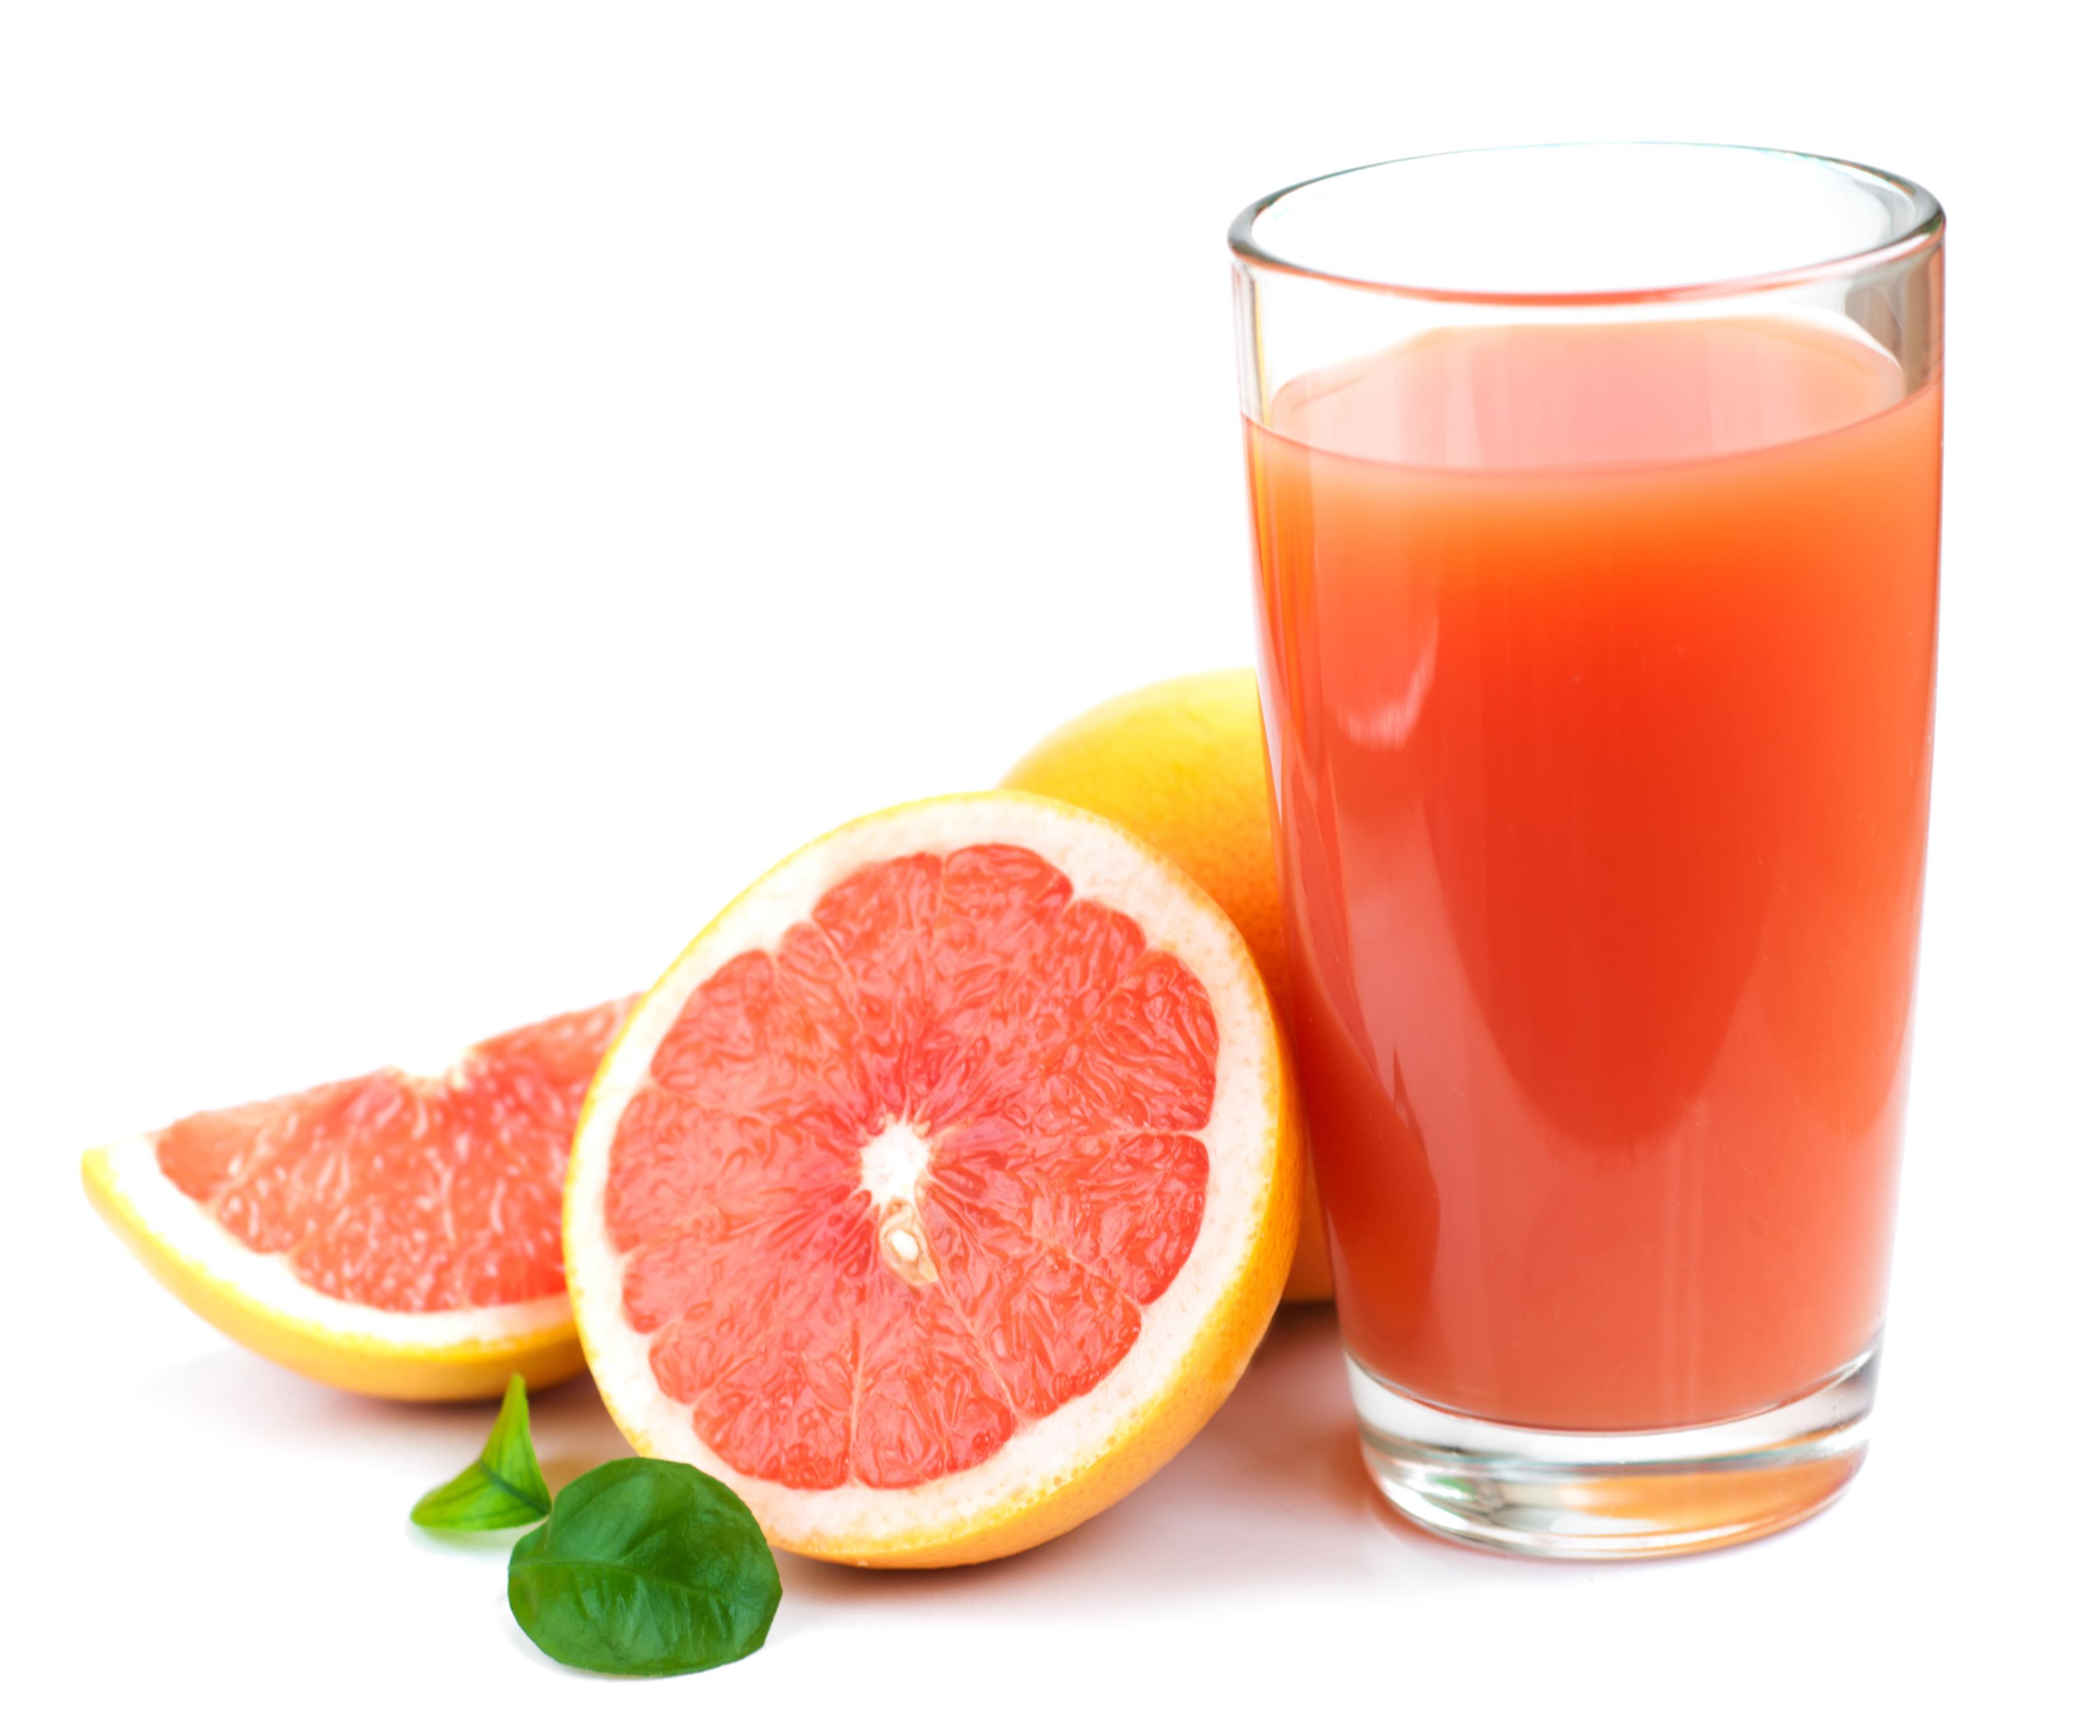 Grapefruit juice and ripe grapefruits on a white background